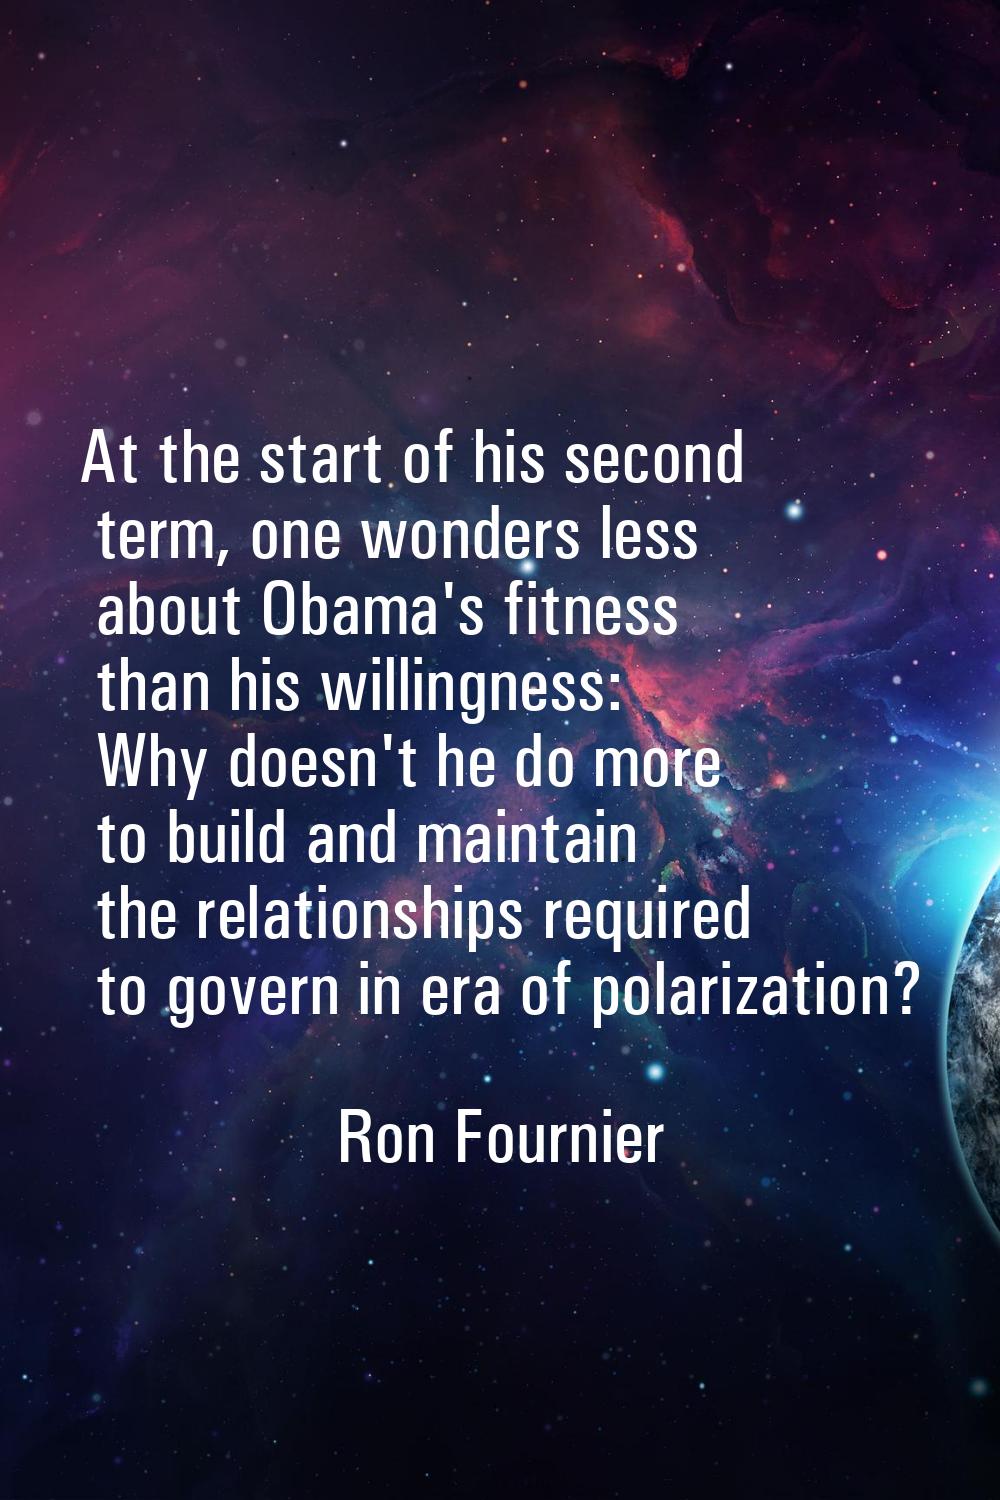 At the start of his second term, one wonders less about Obama's fitness than his willingness: Why d